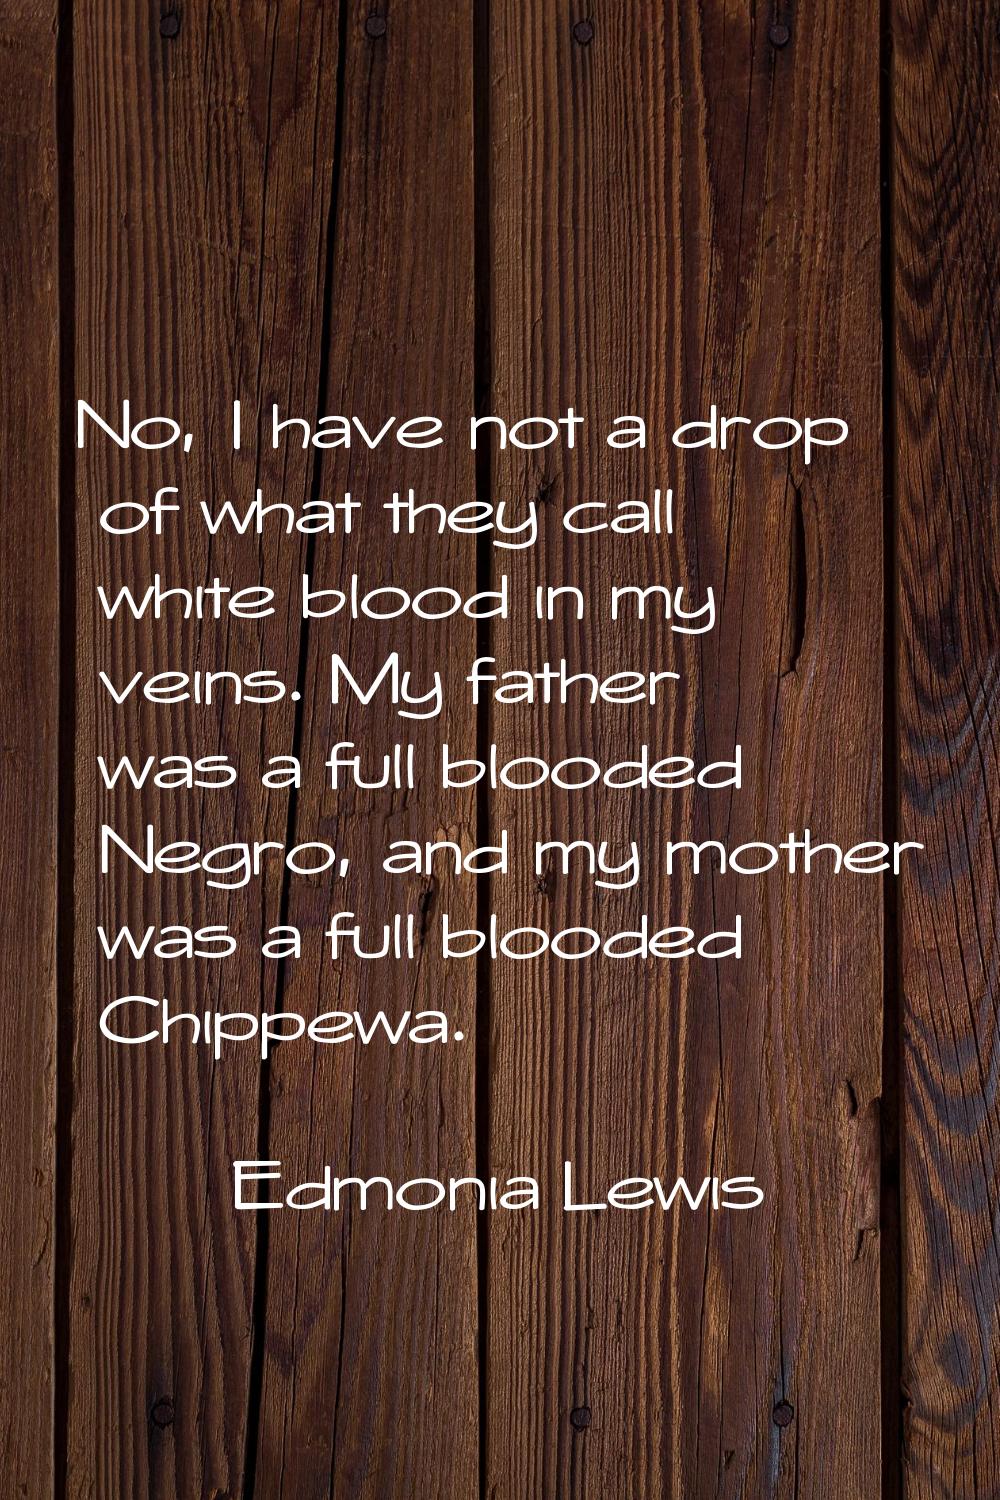 No, I have not a drop of what they call white blood in my veins. My father was a full blooded Negro